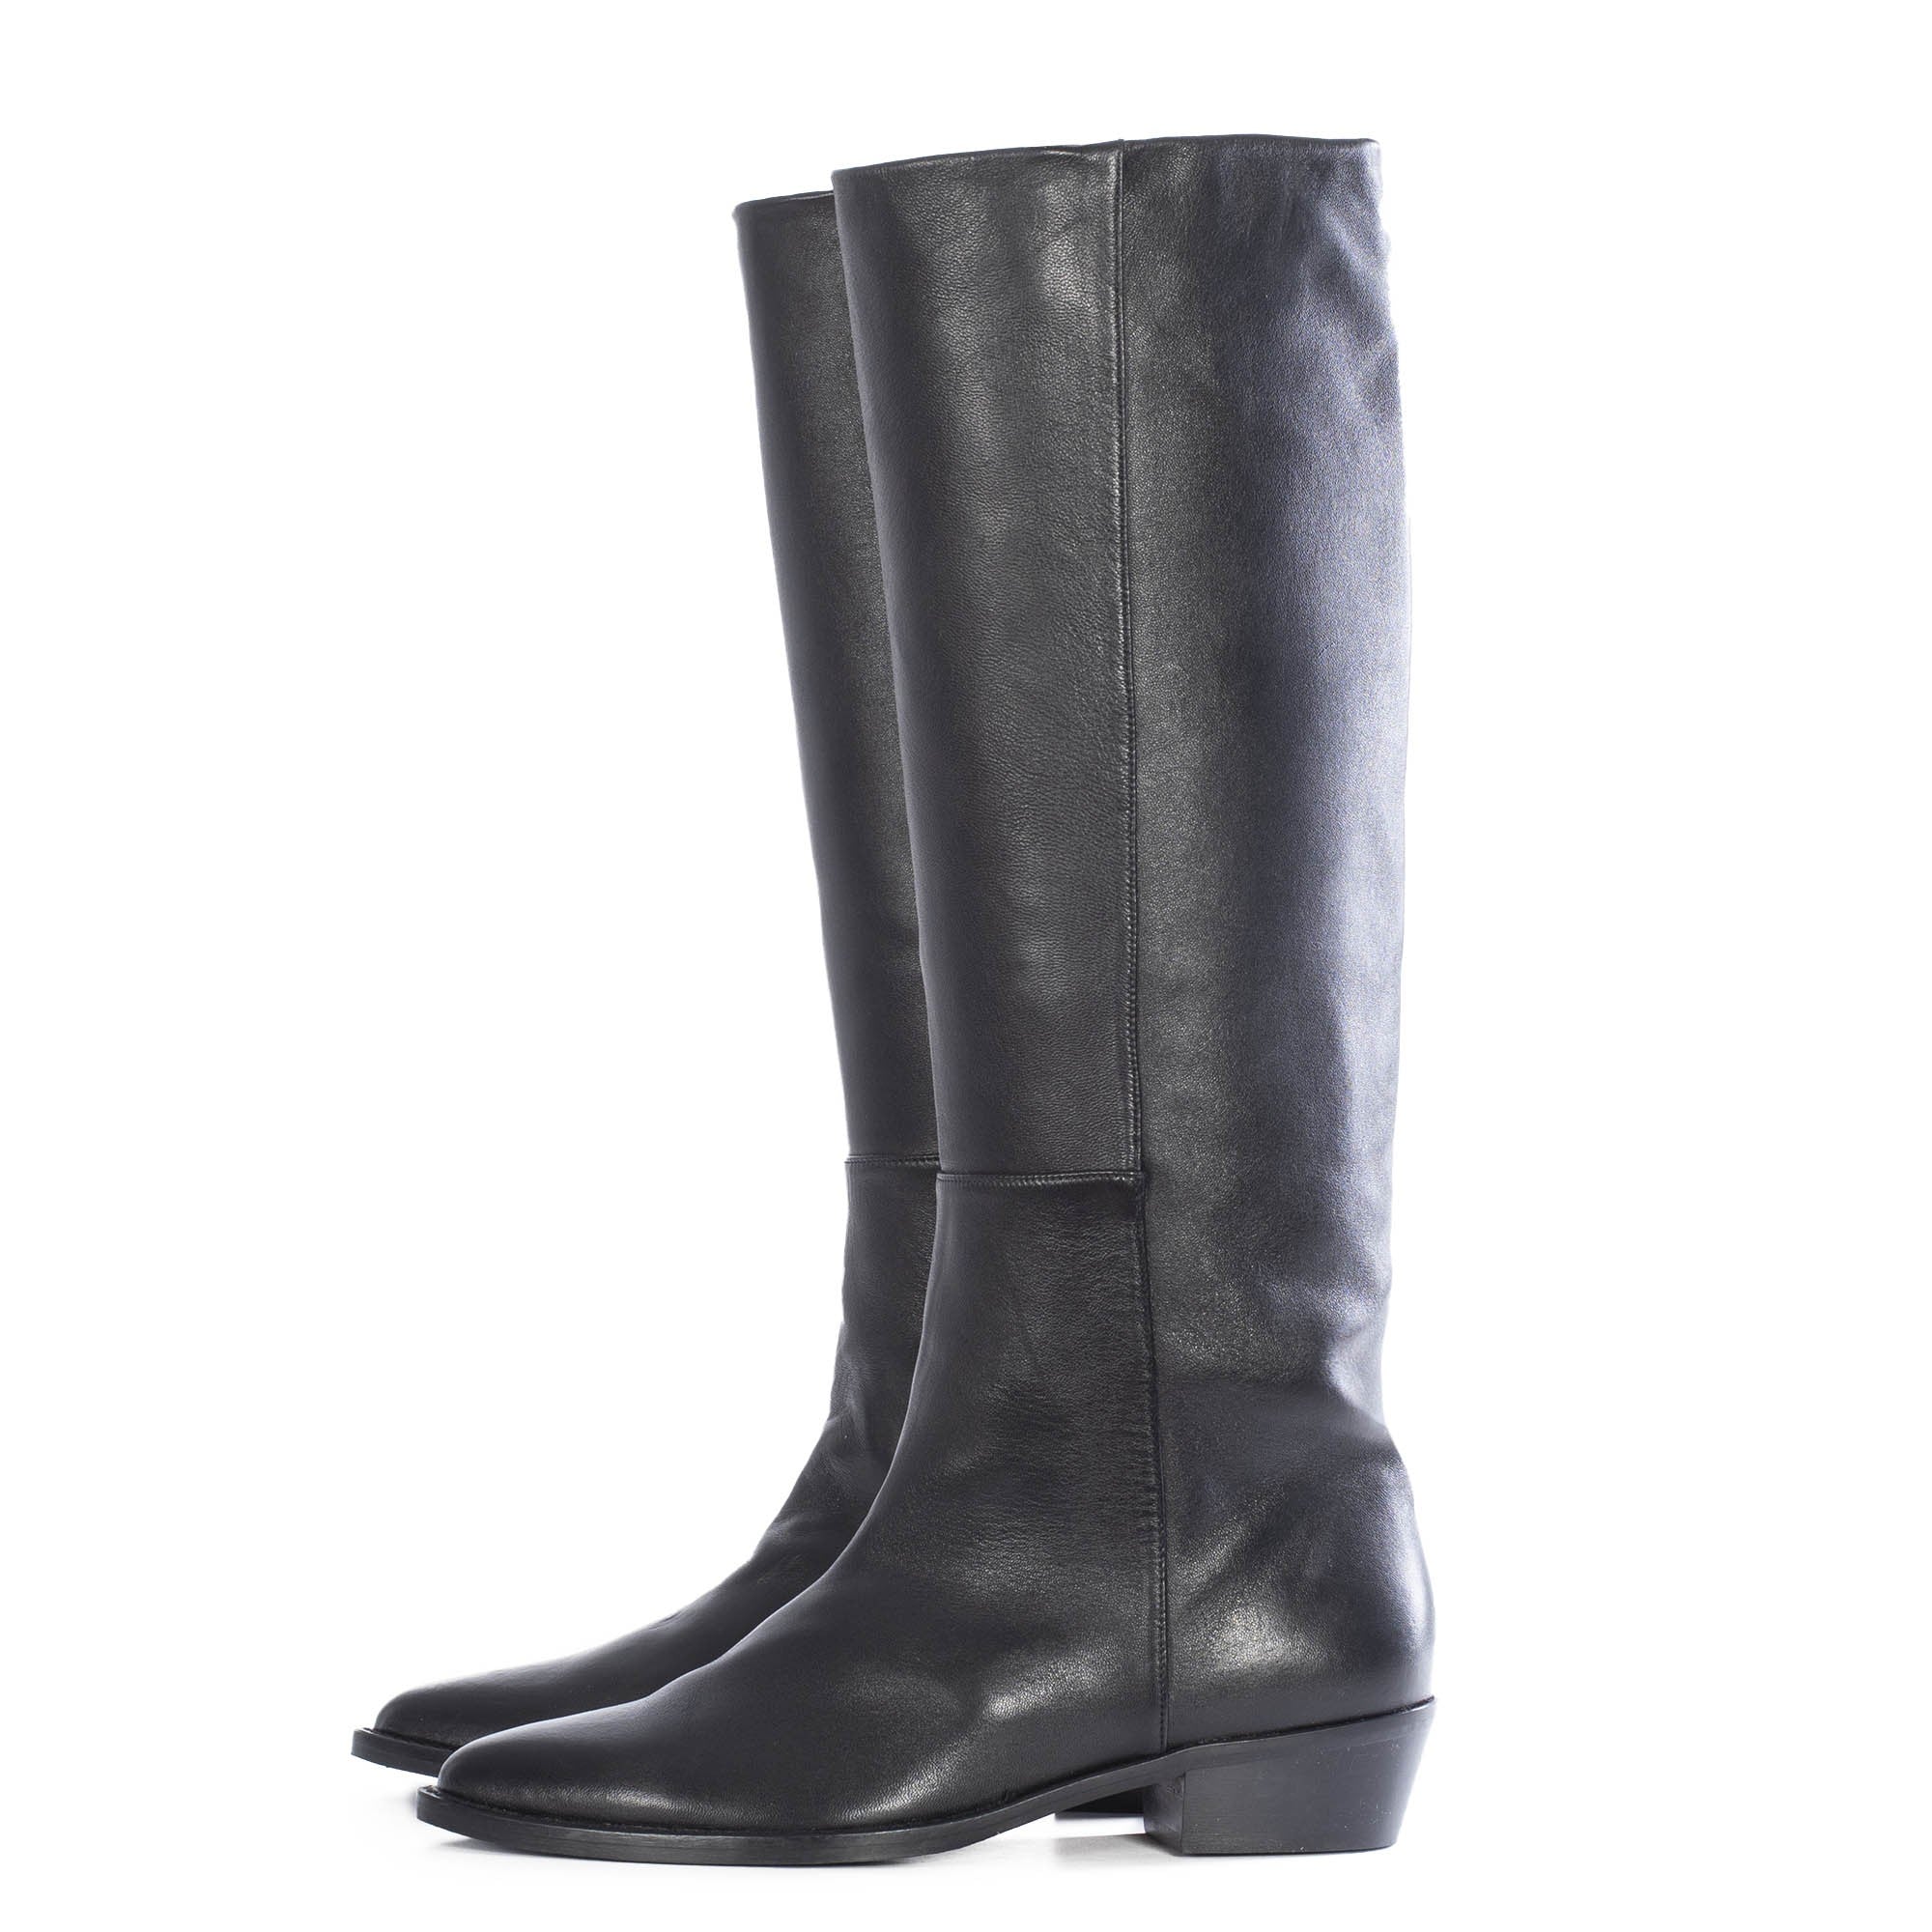 TORAL BLACK LEATHER KNEE-HIGH BOOTS